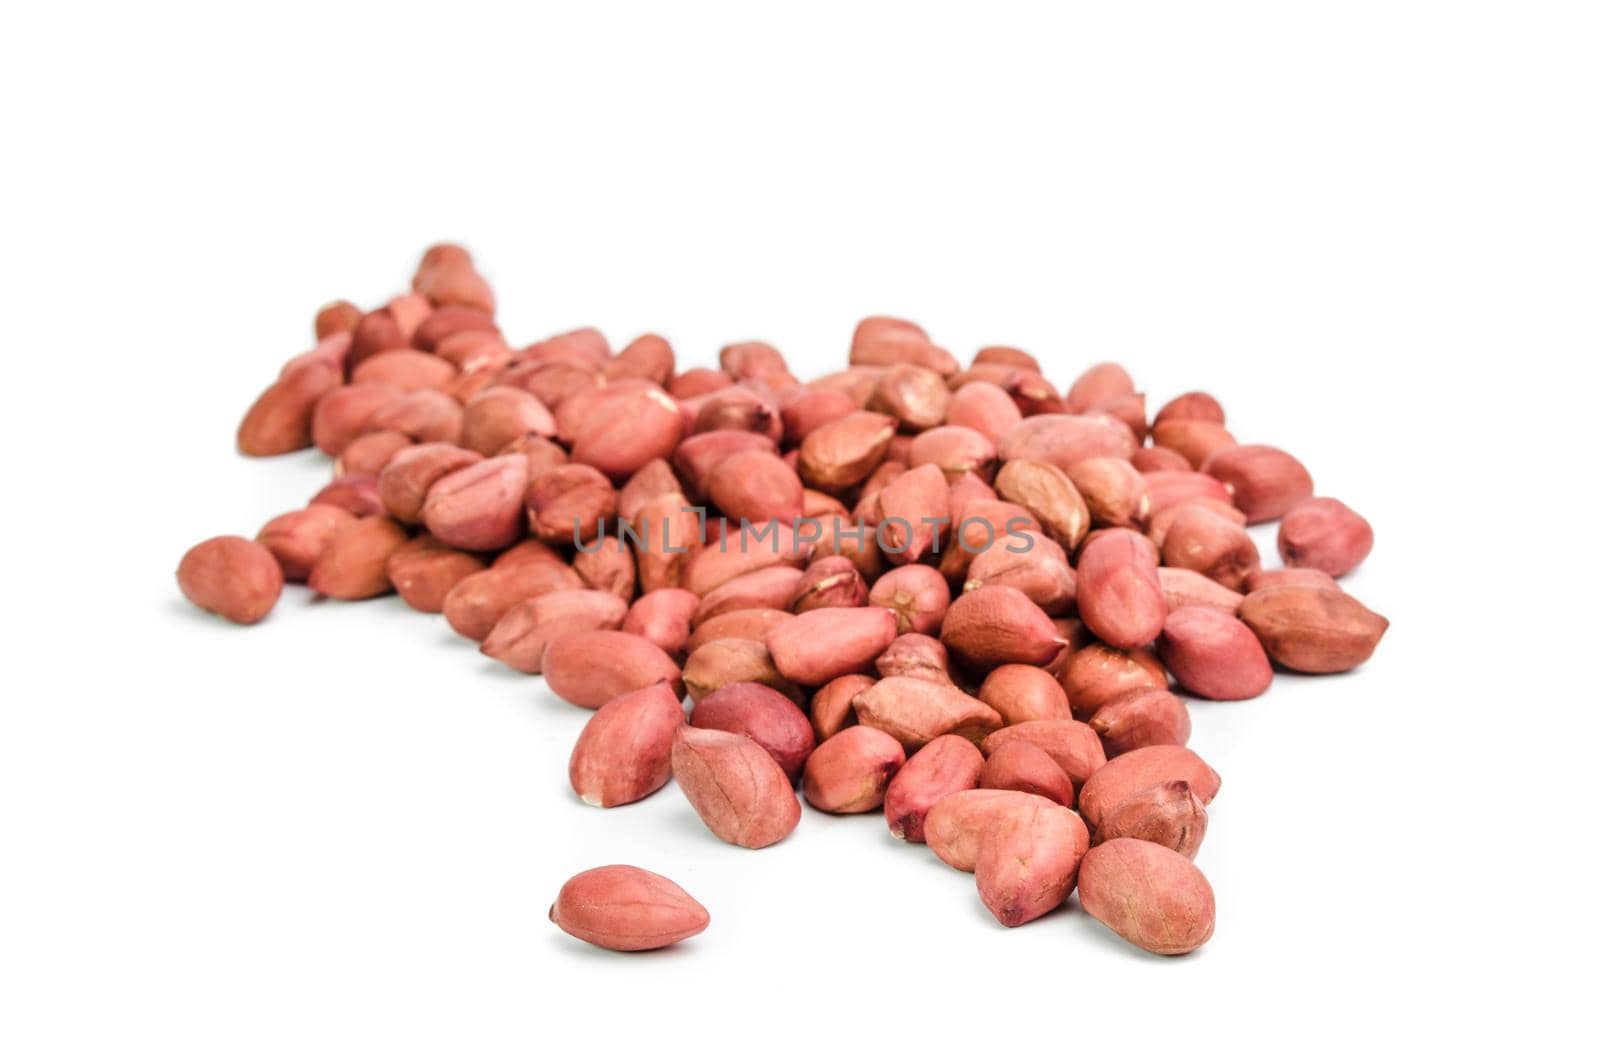 Dried peanuts in closeup on white background.